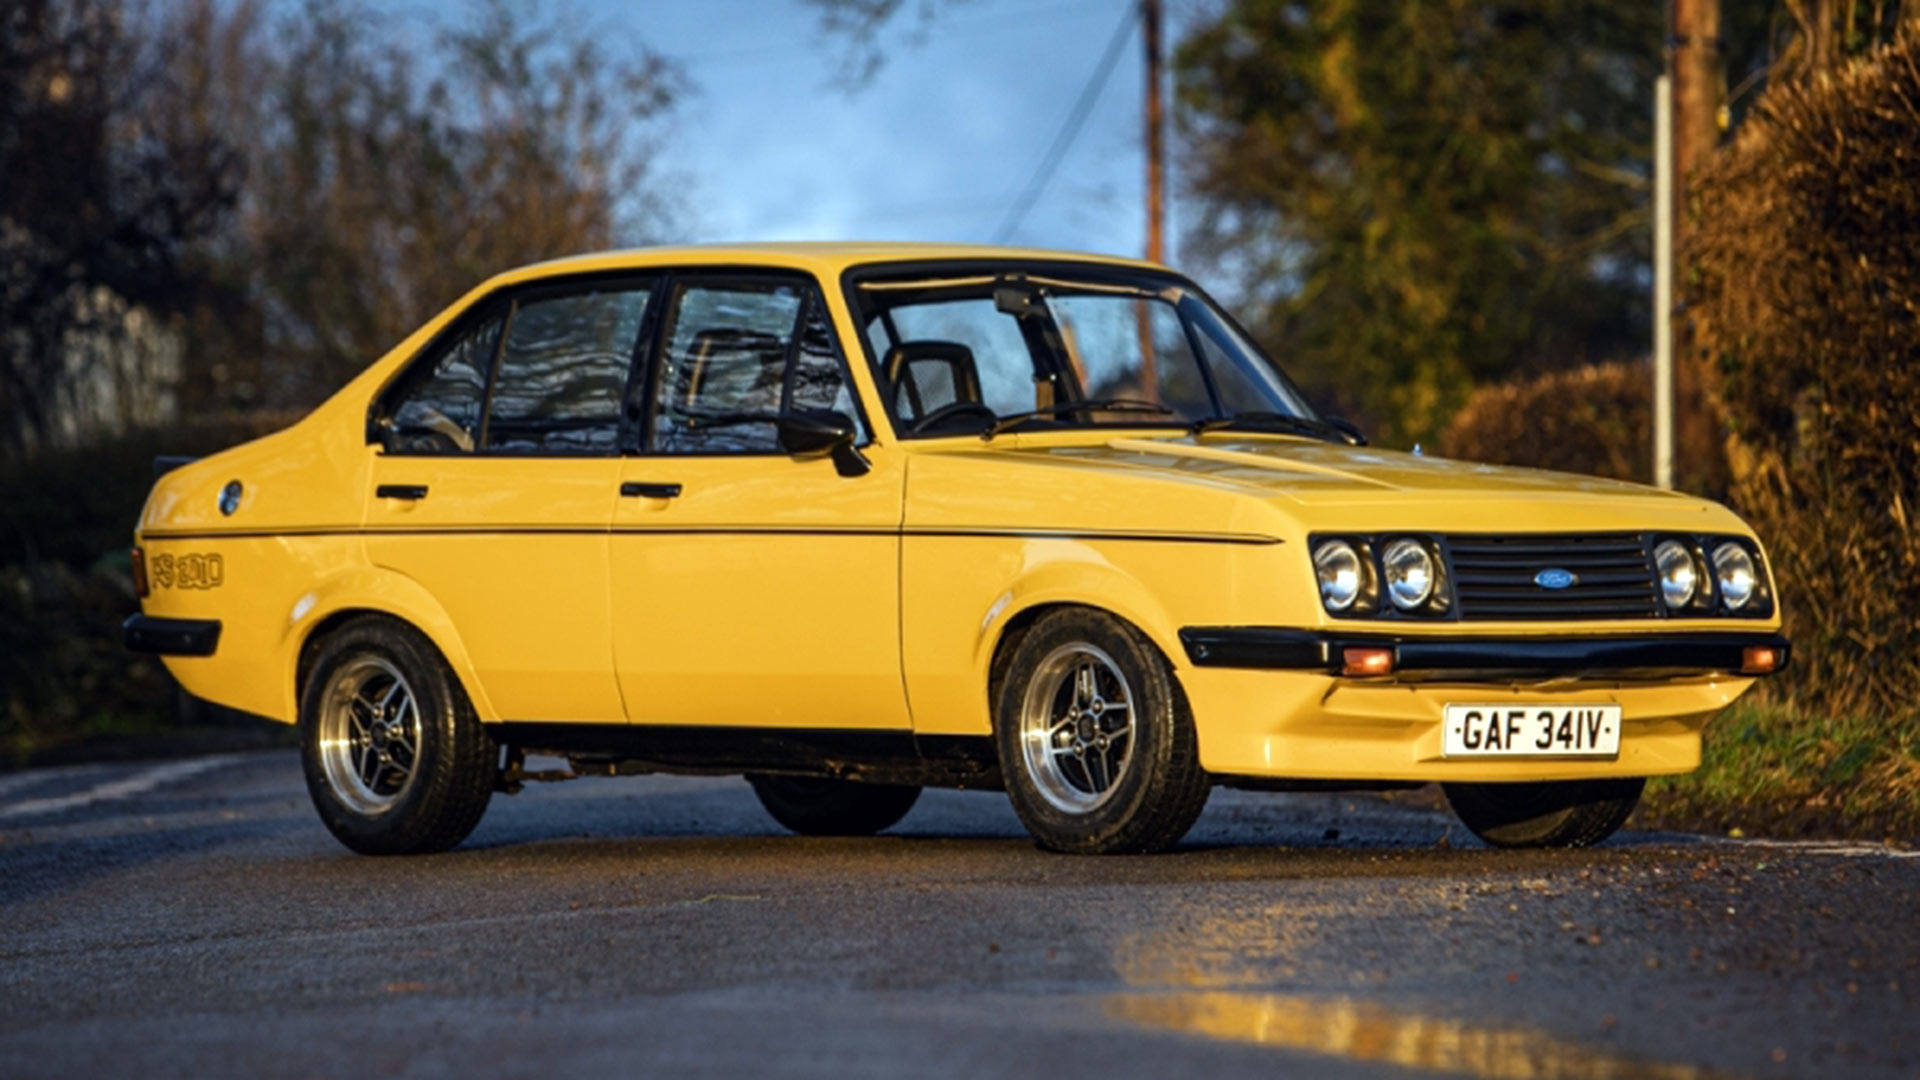 Rare Australian 1979 Ford Escort Rs00 Four Door Heading To Auction Motoring Research